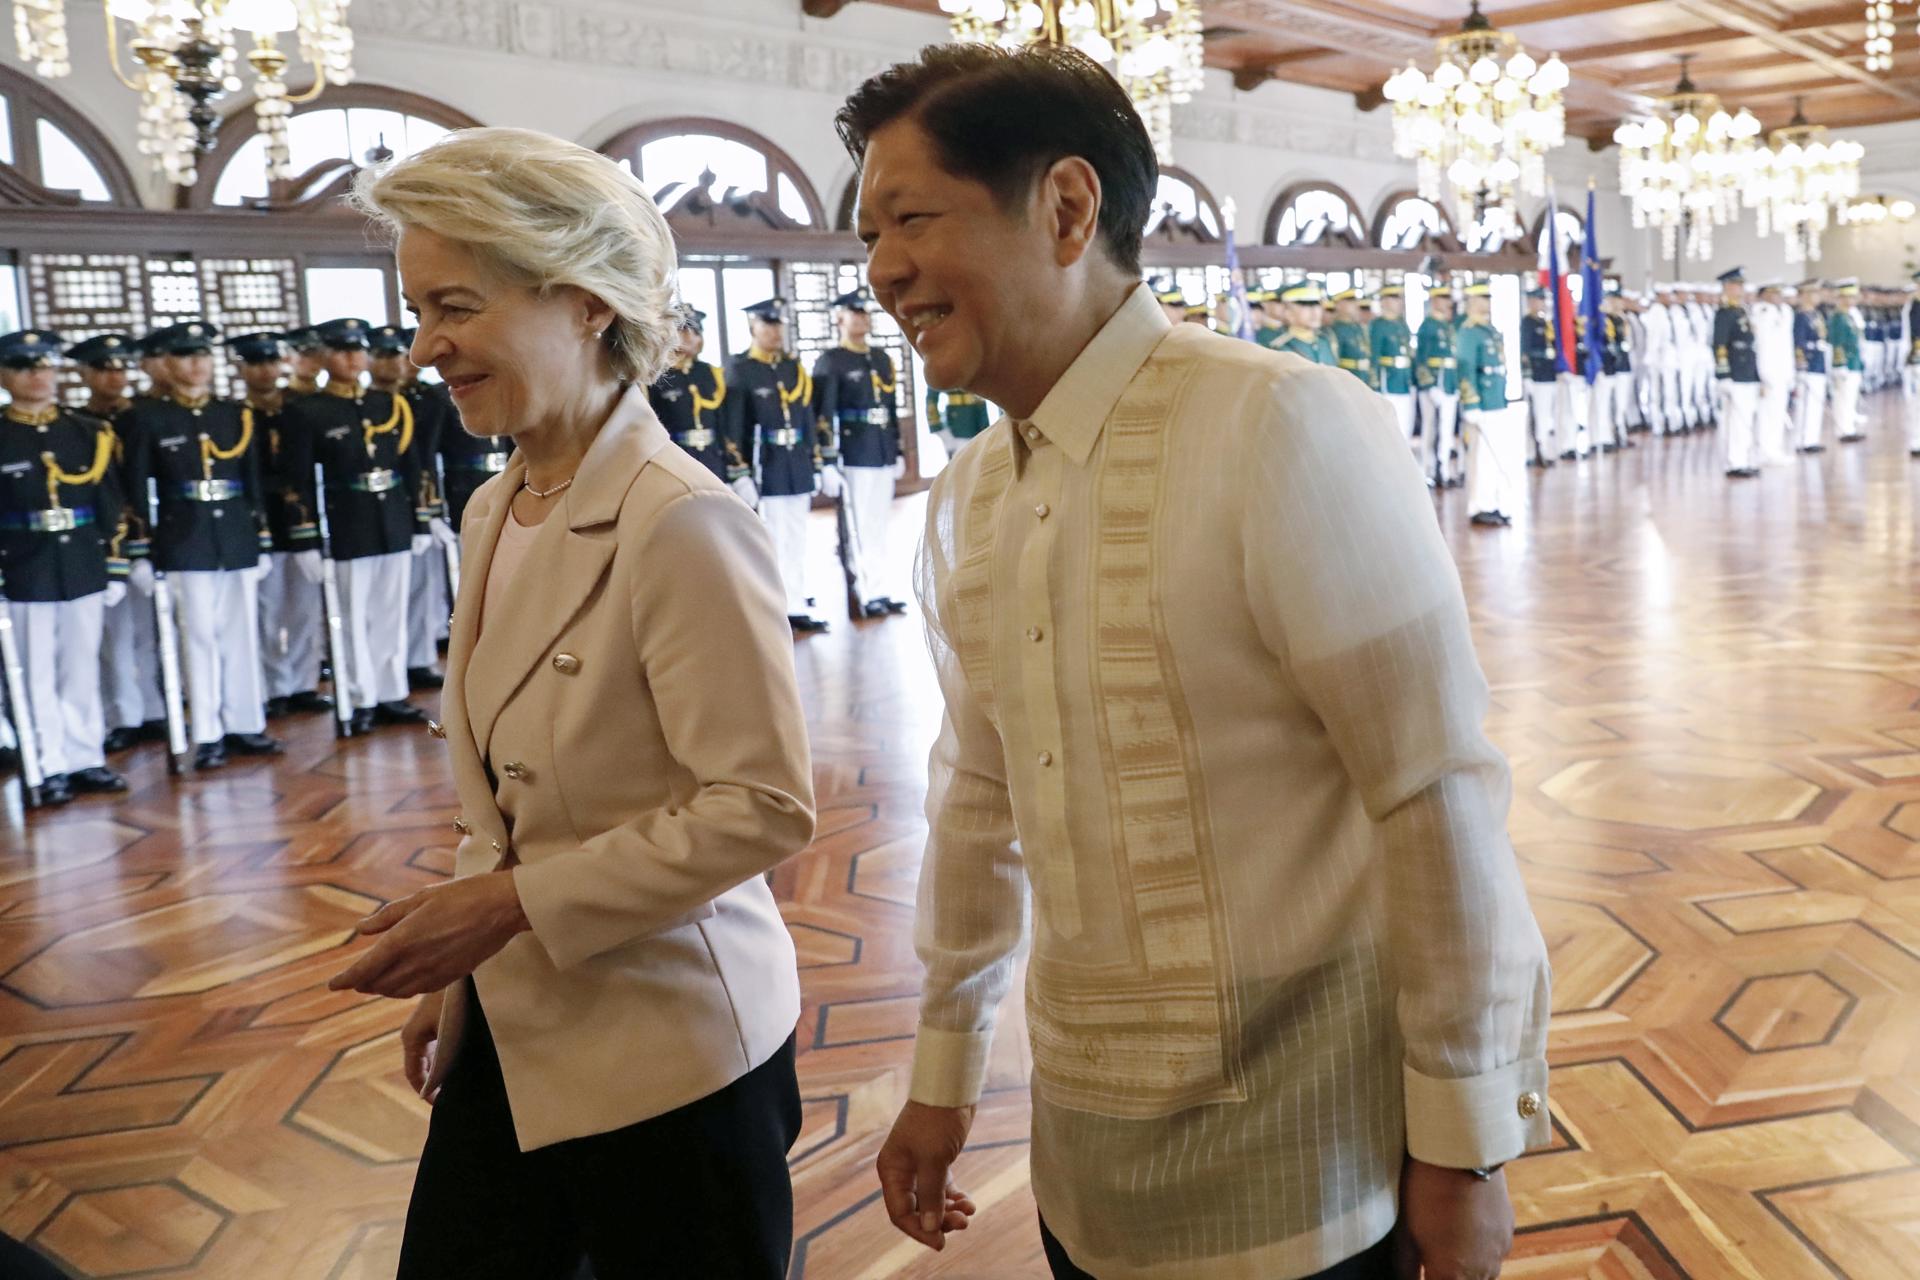 Philippine President Ferdinand Marcos Jr. (R) walks with President of the European Commission Ursula von der Leyen during arrival honors at the Malacanang presidential palace in Manila, Philippines 31 July 2023. EFE/EPA/ROLEX DELA PENA/POOL